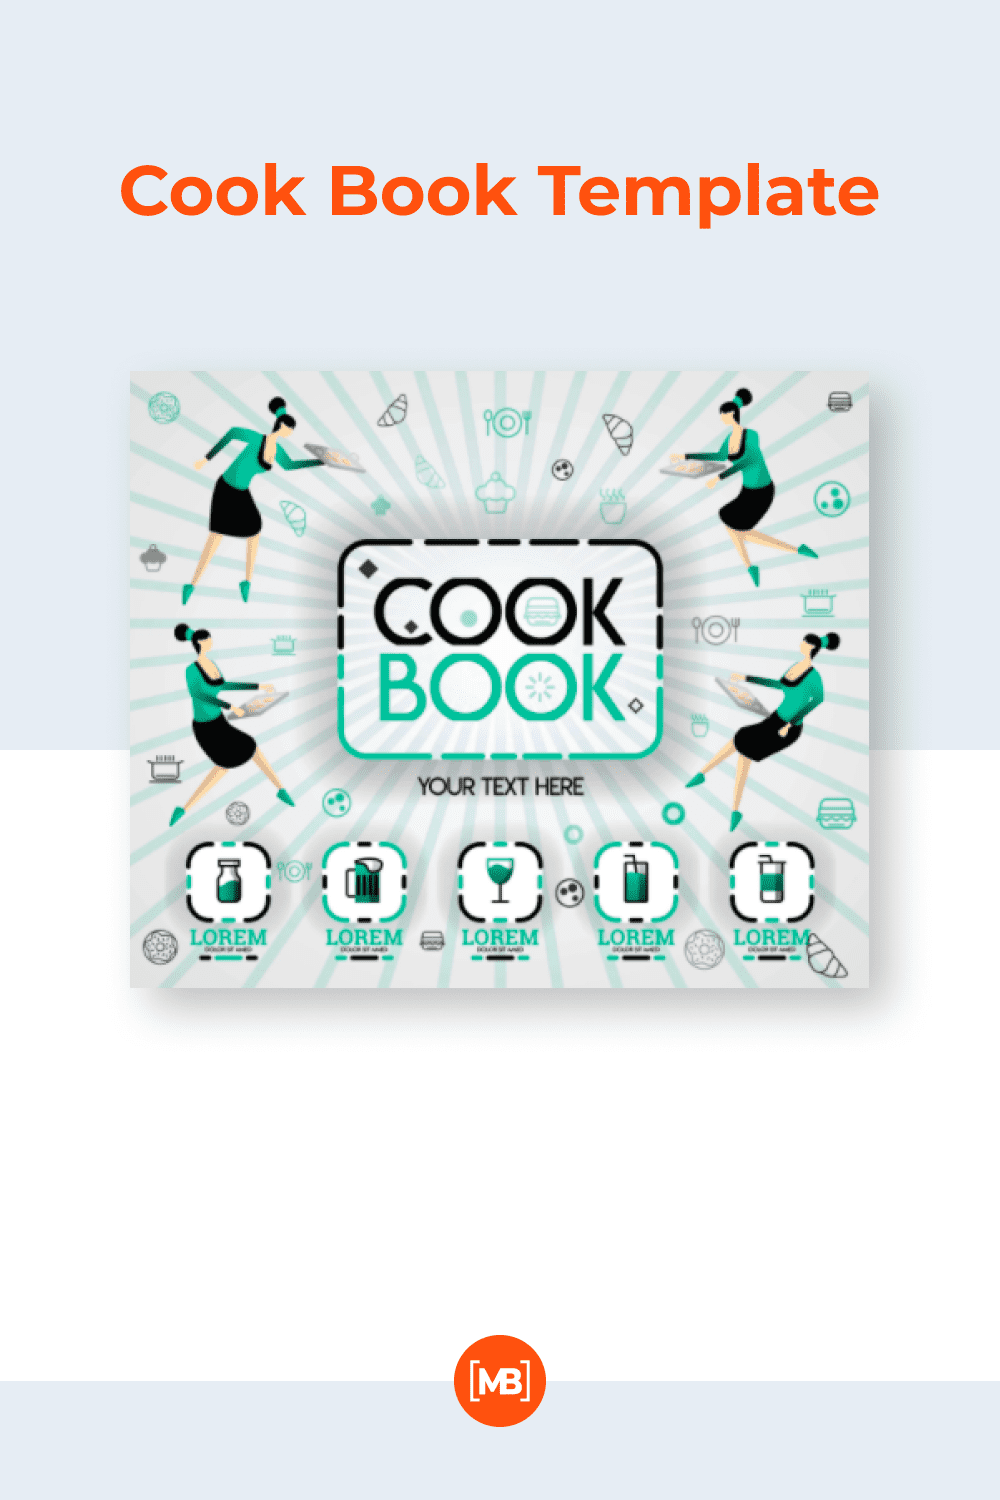 A creative style template for recipes in a train station canteen format.